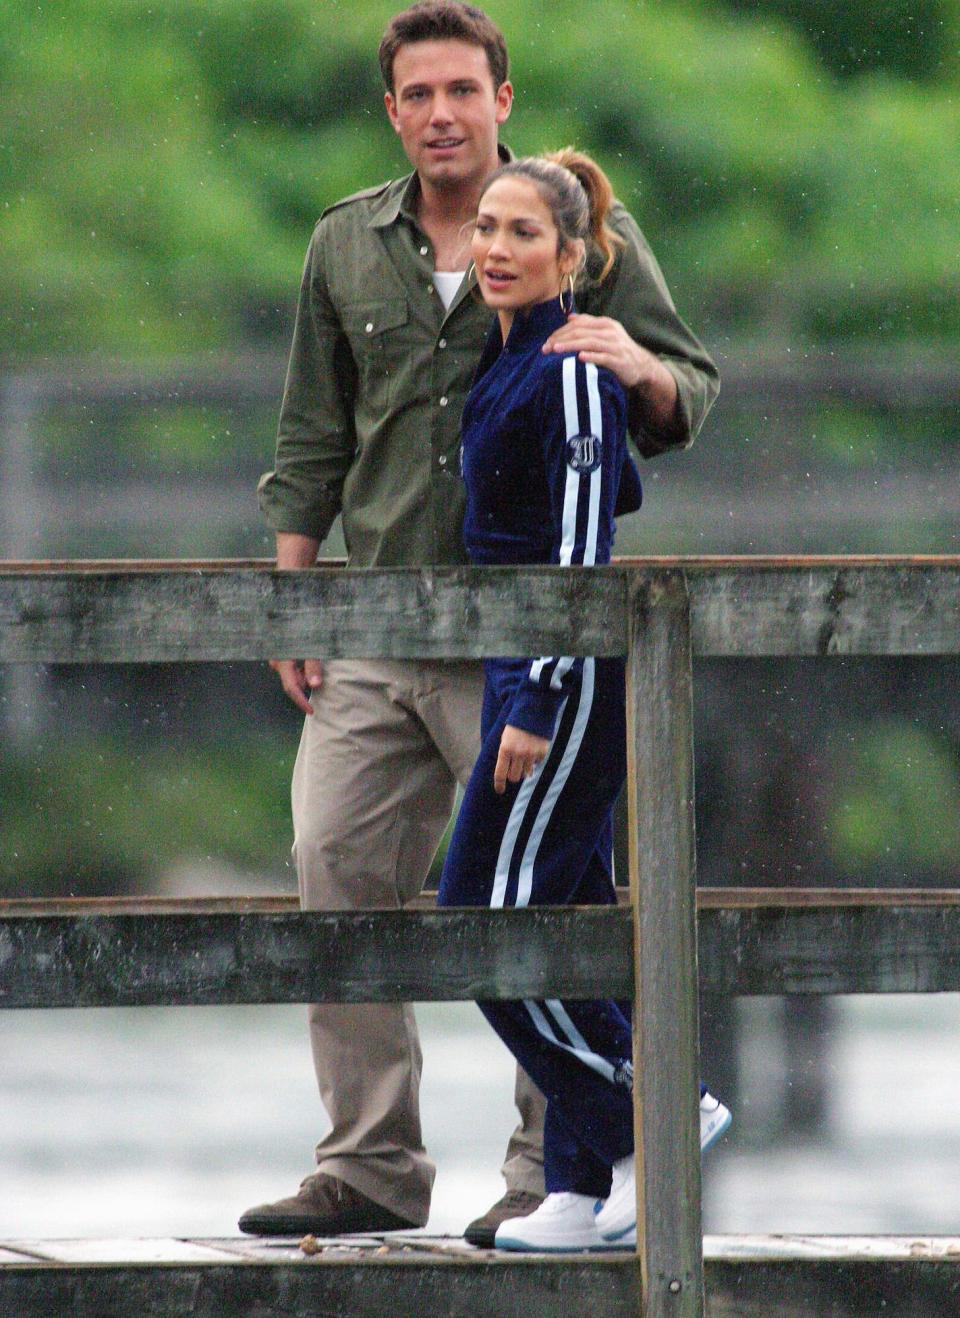 Jennifer Lopez and Ben Affleck in Canada on July 13, 2003.